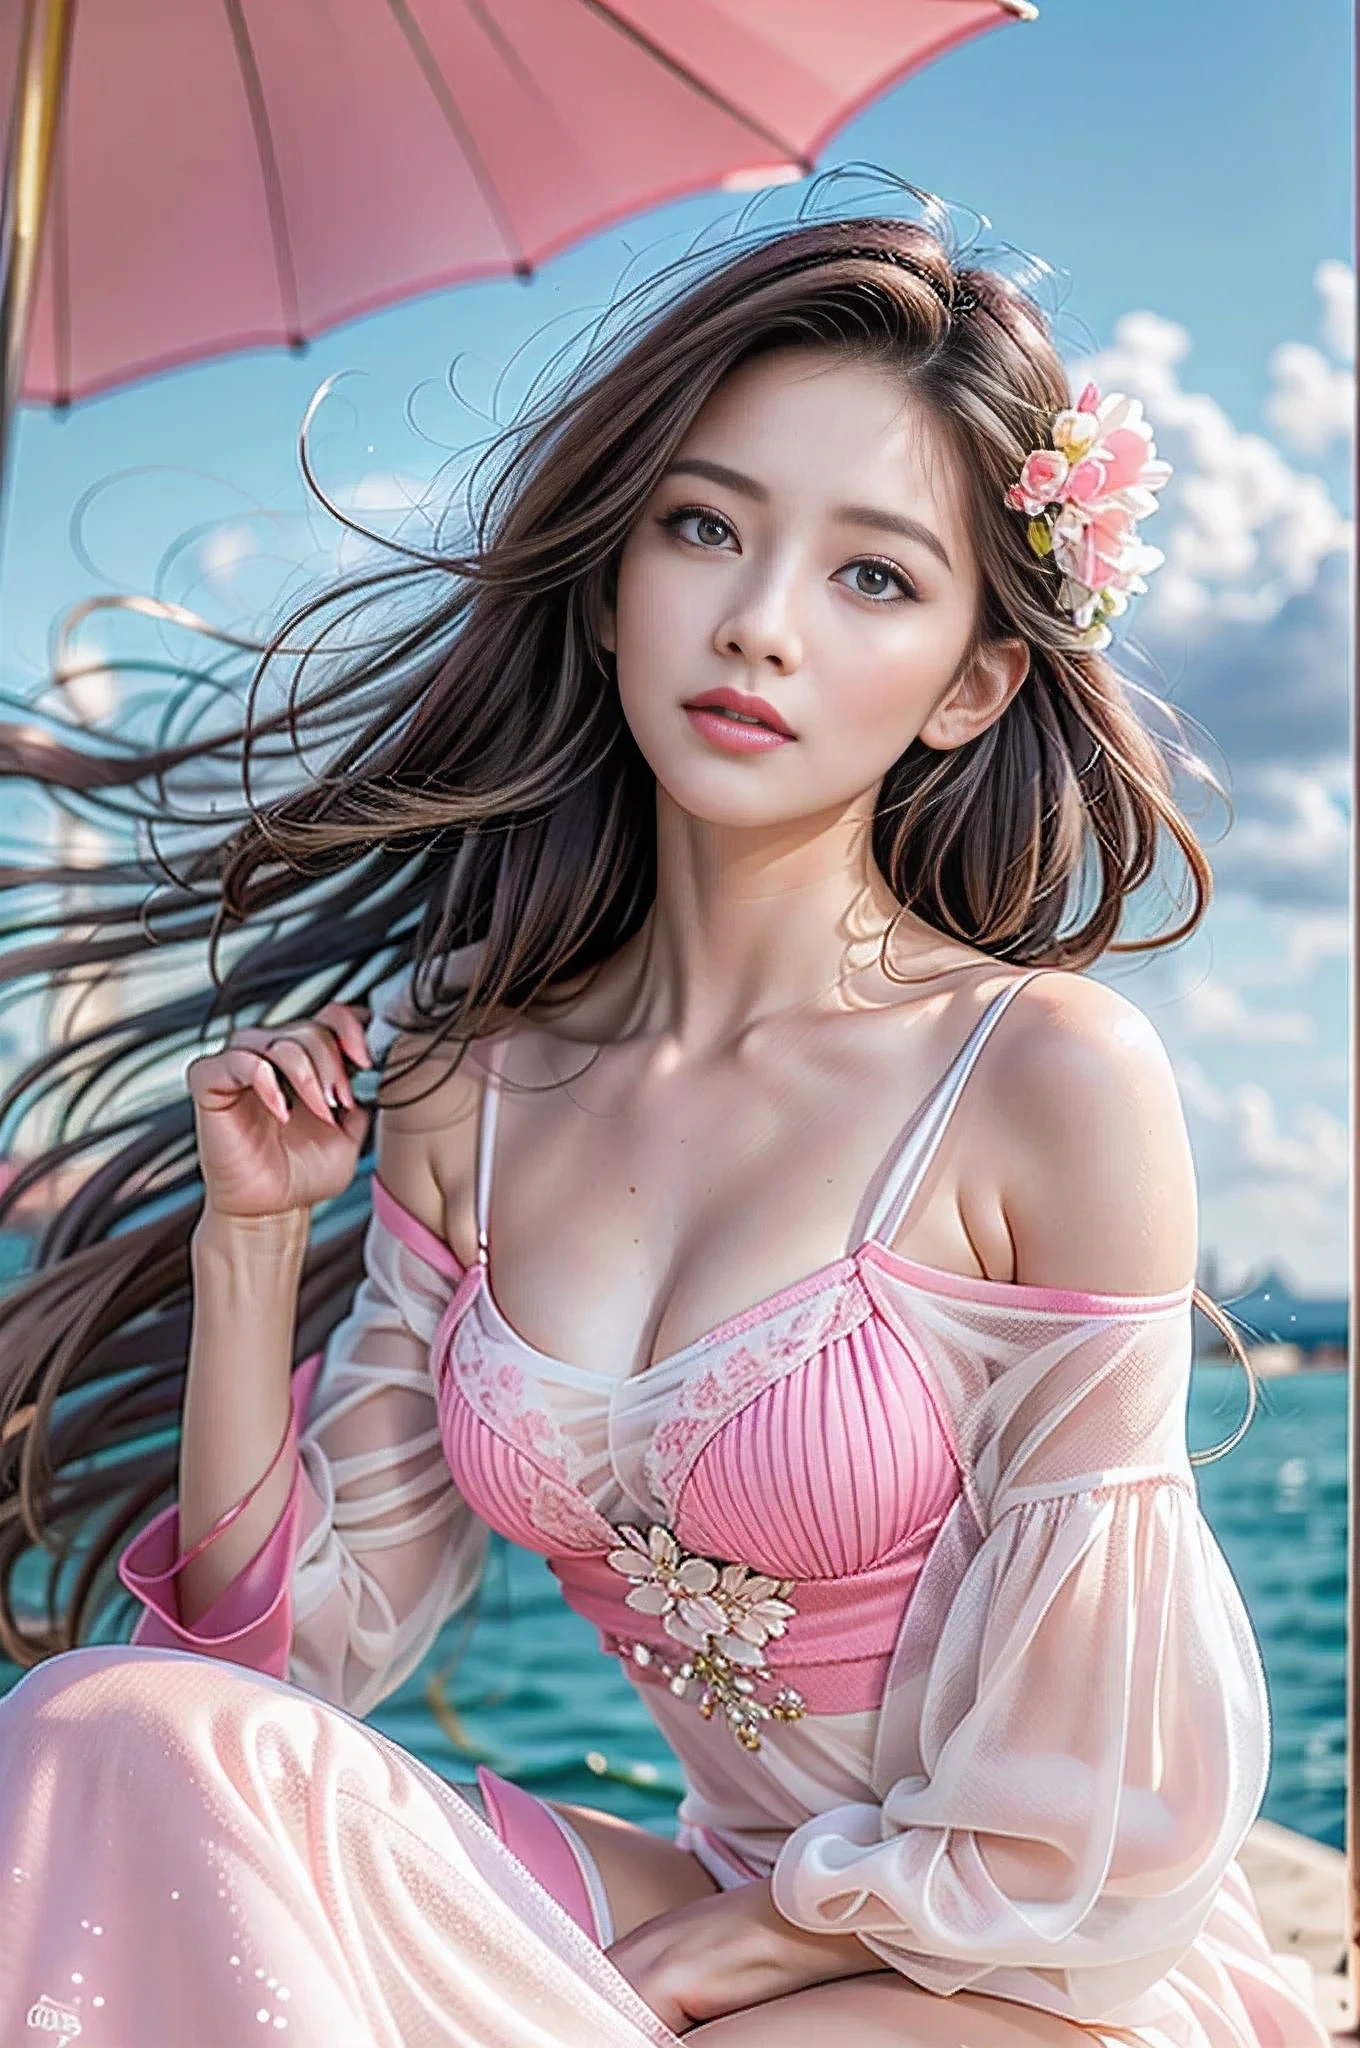 ((Ultra-realistic最high quality))16k resolution, ((photo realistic:1.55)), (1girl:1.4) 21years old、fashion supermodel、cinematic lighting, (Increase quality:1.2), (best quality real texture skin:1.2), Beautiful and charming woman in fashion trend, full body: 1.6, holding flowers, random hairstyle, sitting under a parasol, by the sea, tight slip dress random color, wind blowing hair, blue sky and white clouds, delicate sexy collarbone, covering chest, charming goose egg face, double eyelids, smart peach blossom eyes, pink lips, small upturned nose, bare shoulders, focused face, face close-up, ultra-high definition, super detail, ultra-thin translucency, fresh and good, see-through, pink